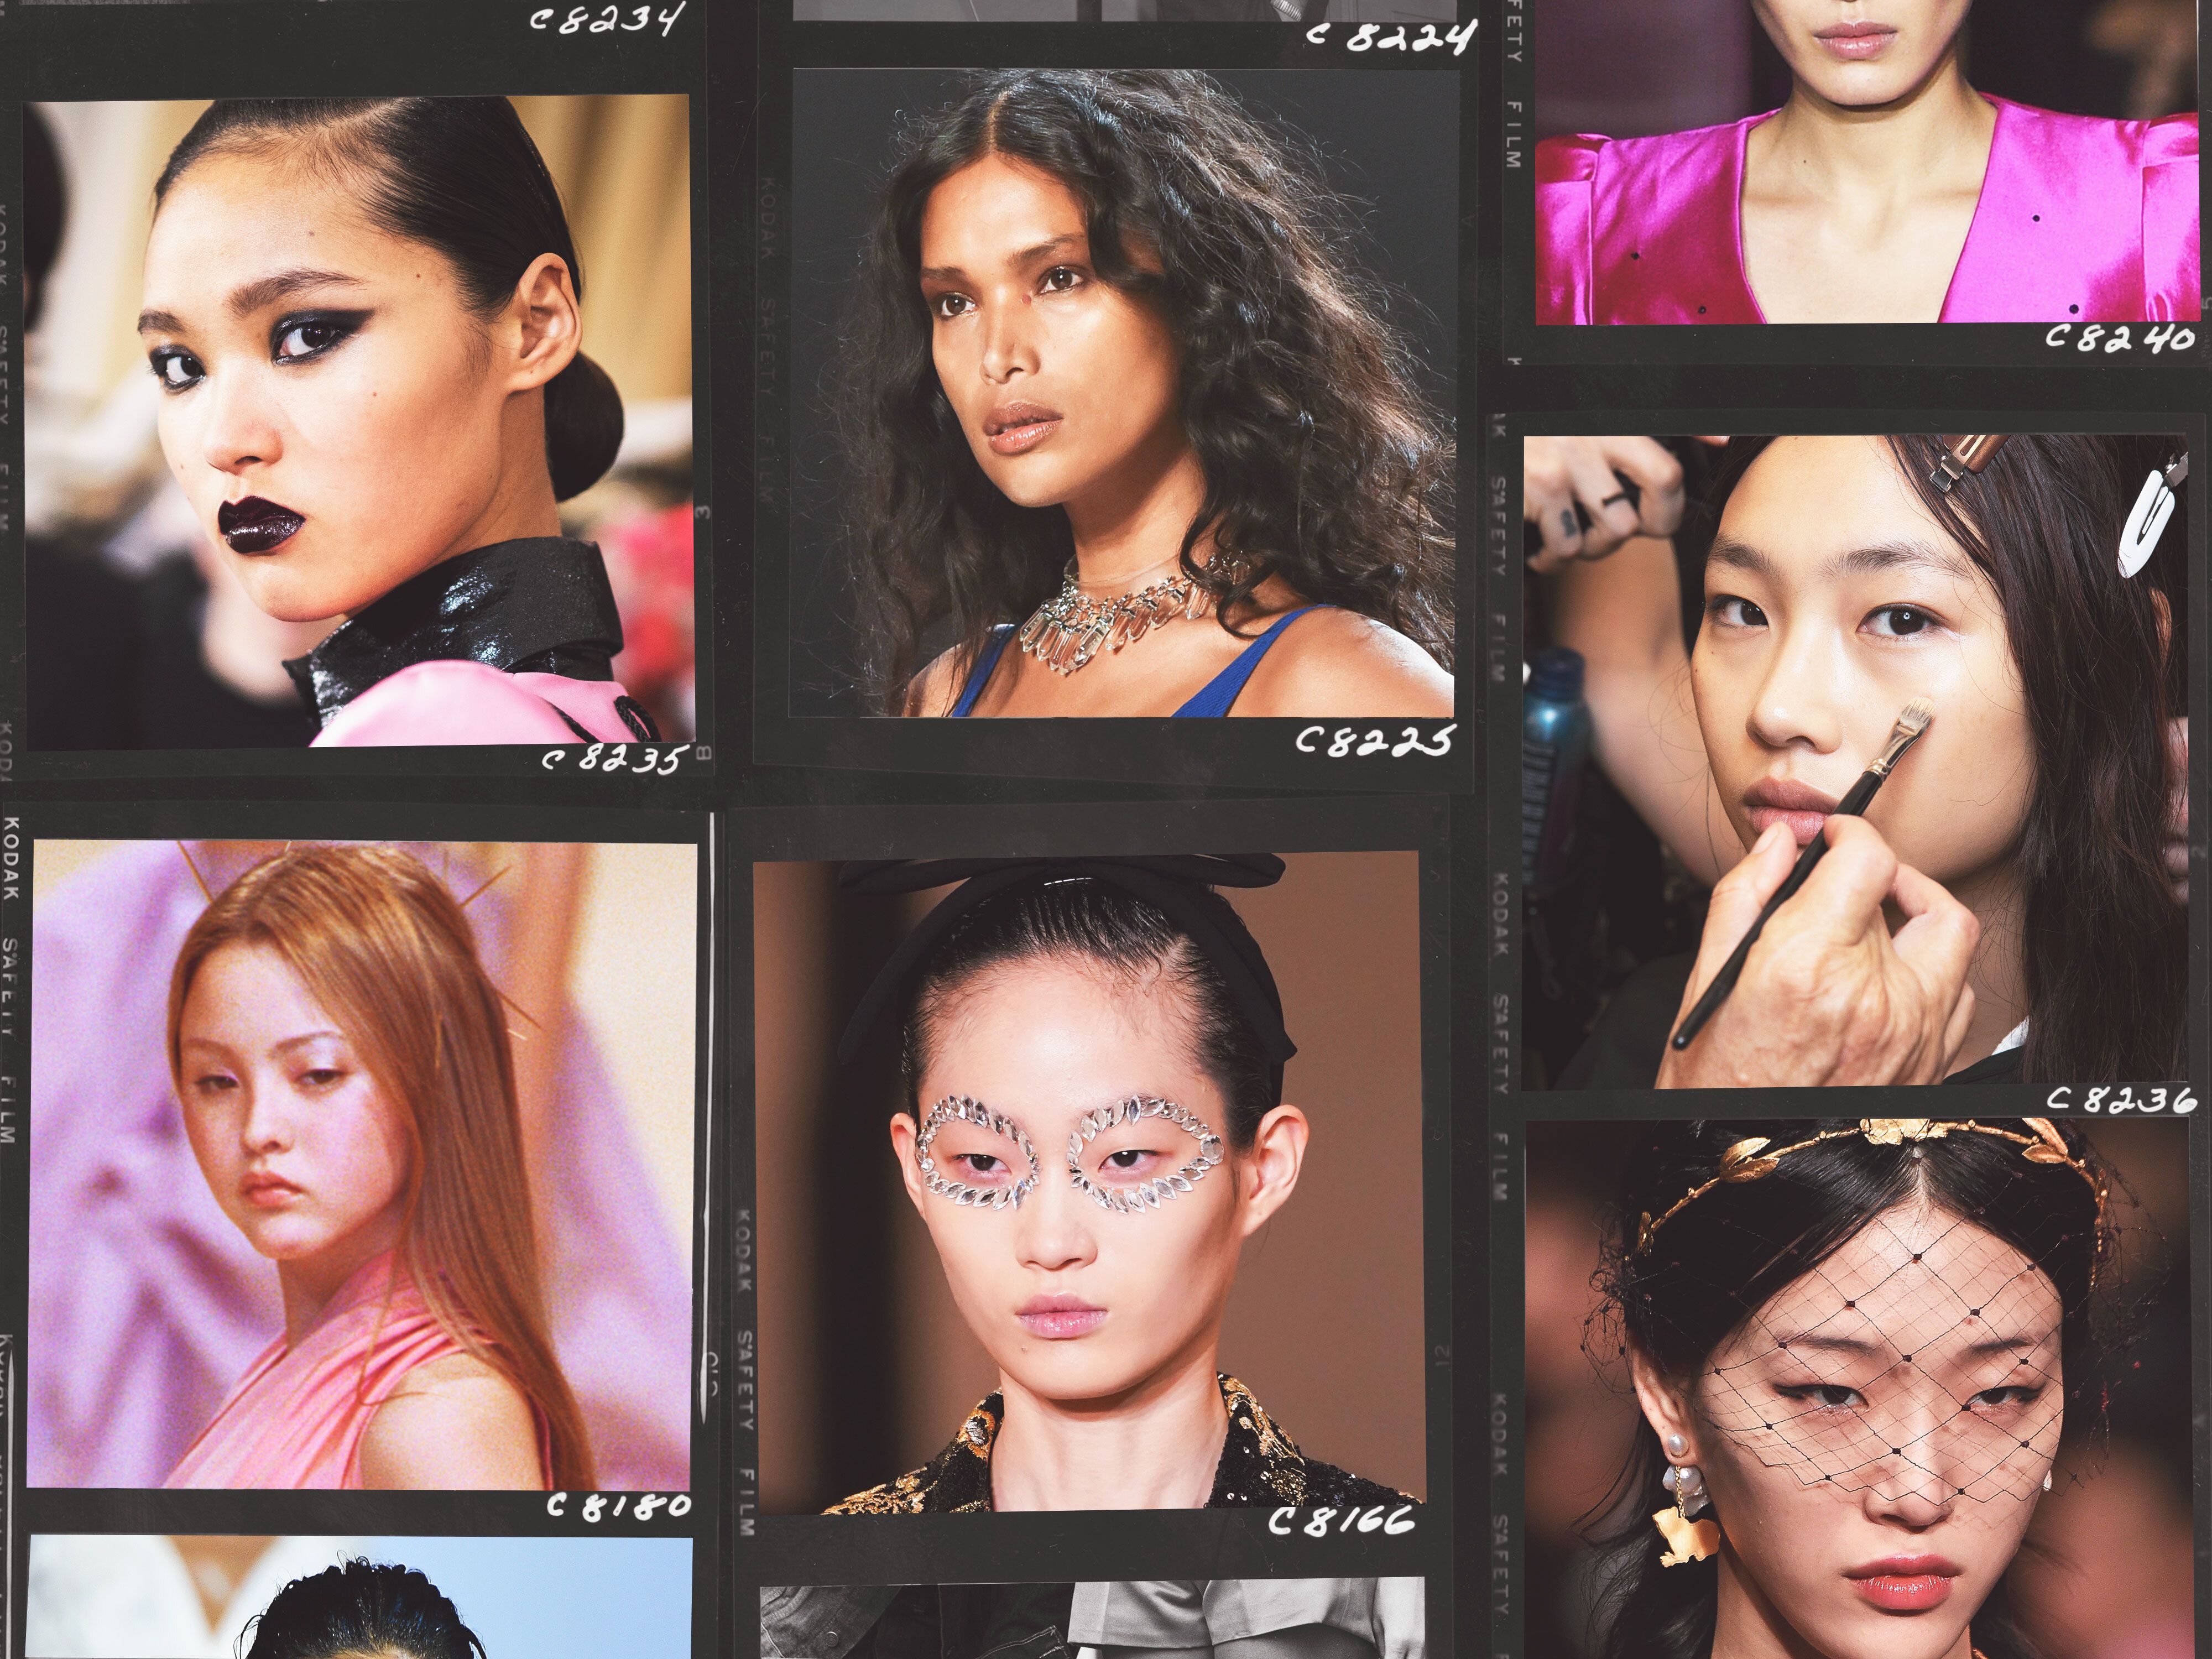 Racism Against the AAPI Community Is a Beauty Industry Problem A Roundtable Discussion from Key Players in The Beauty Industry